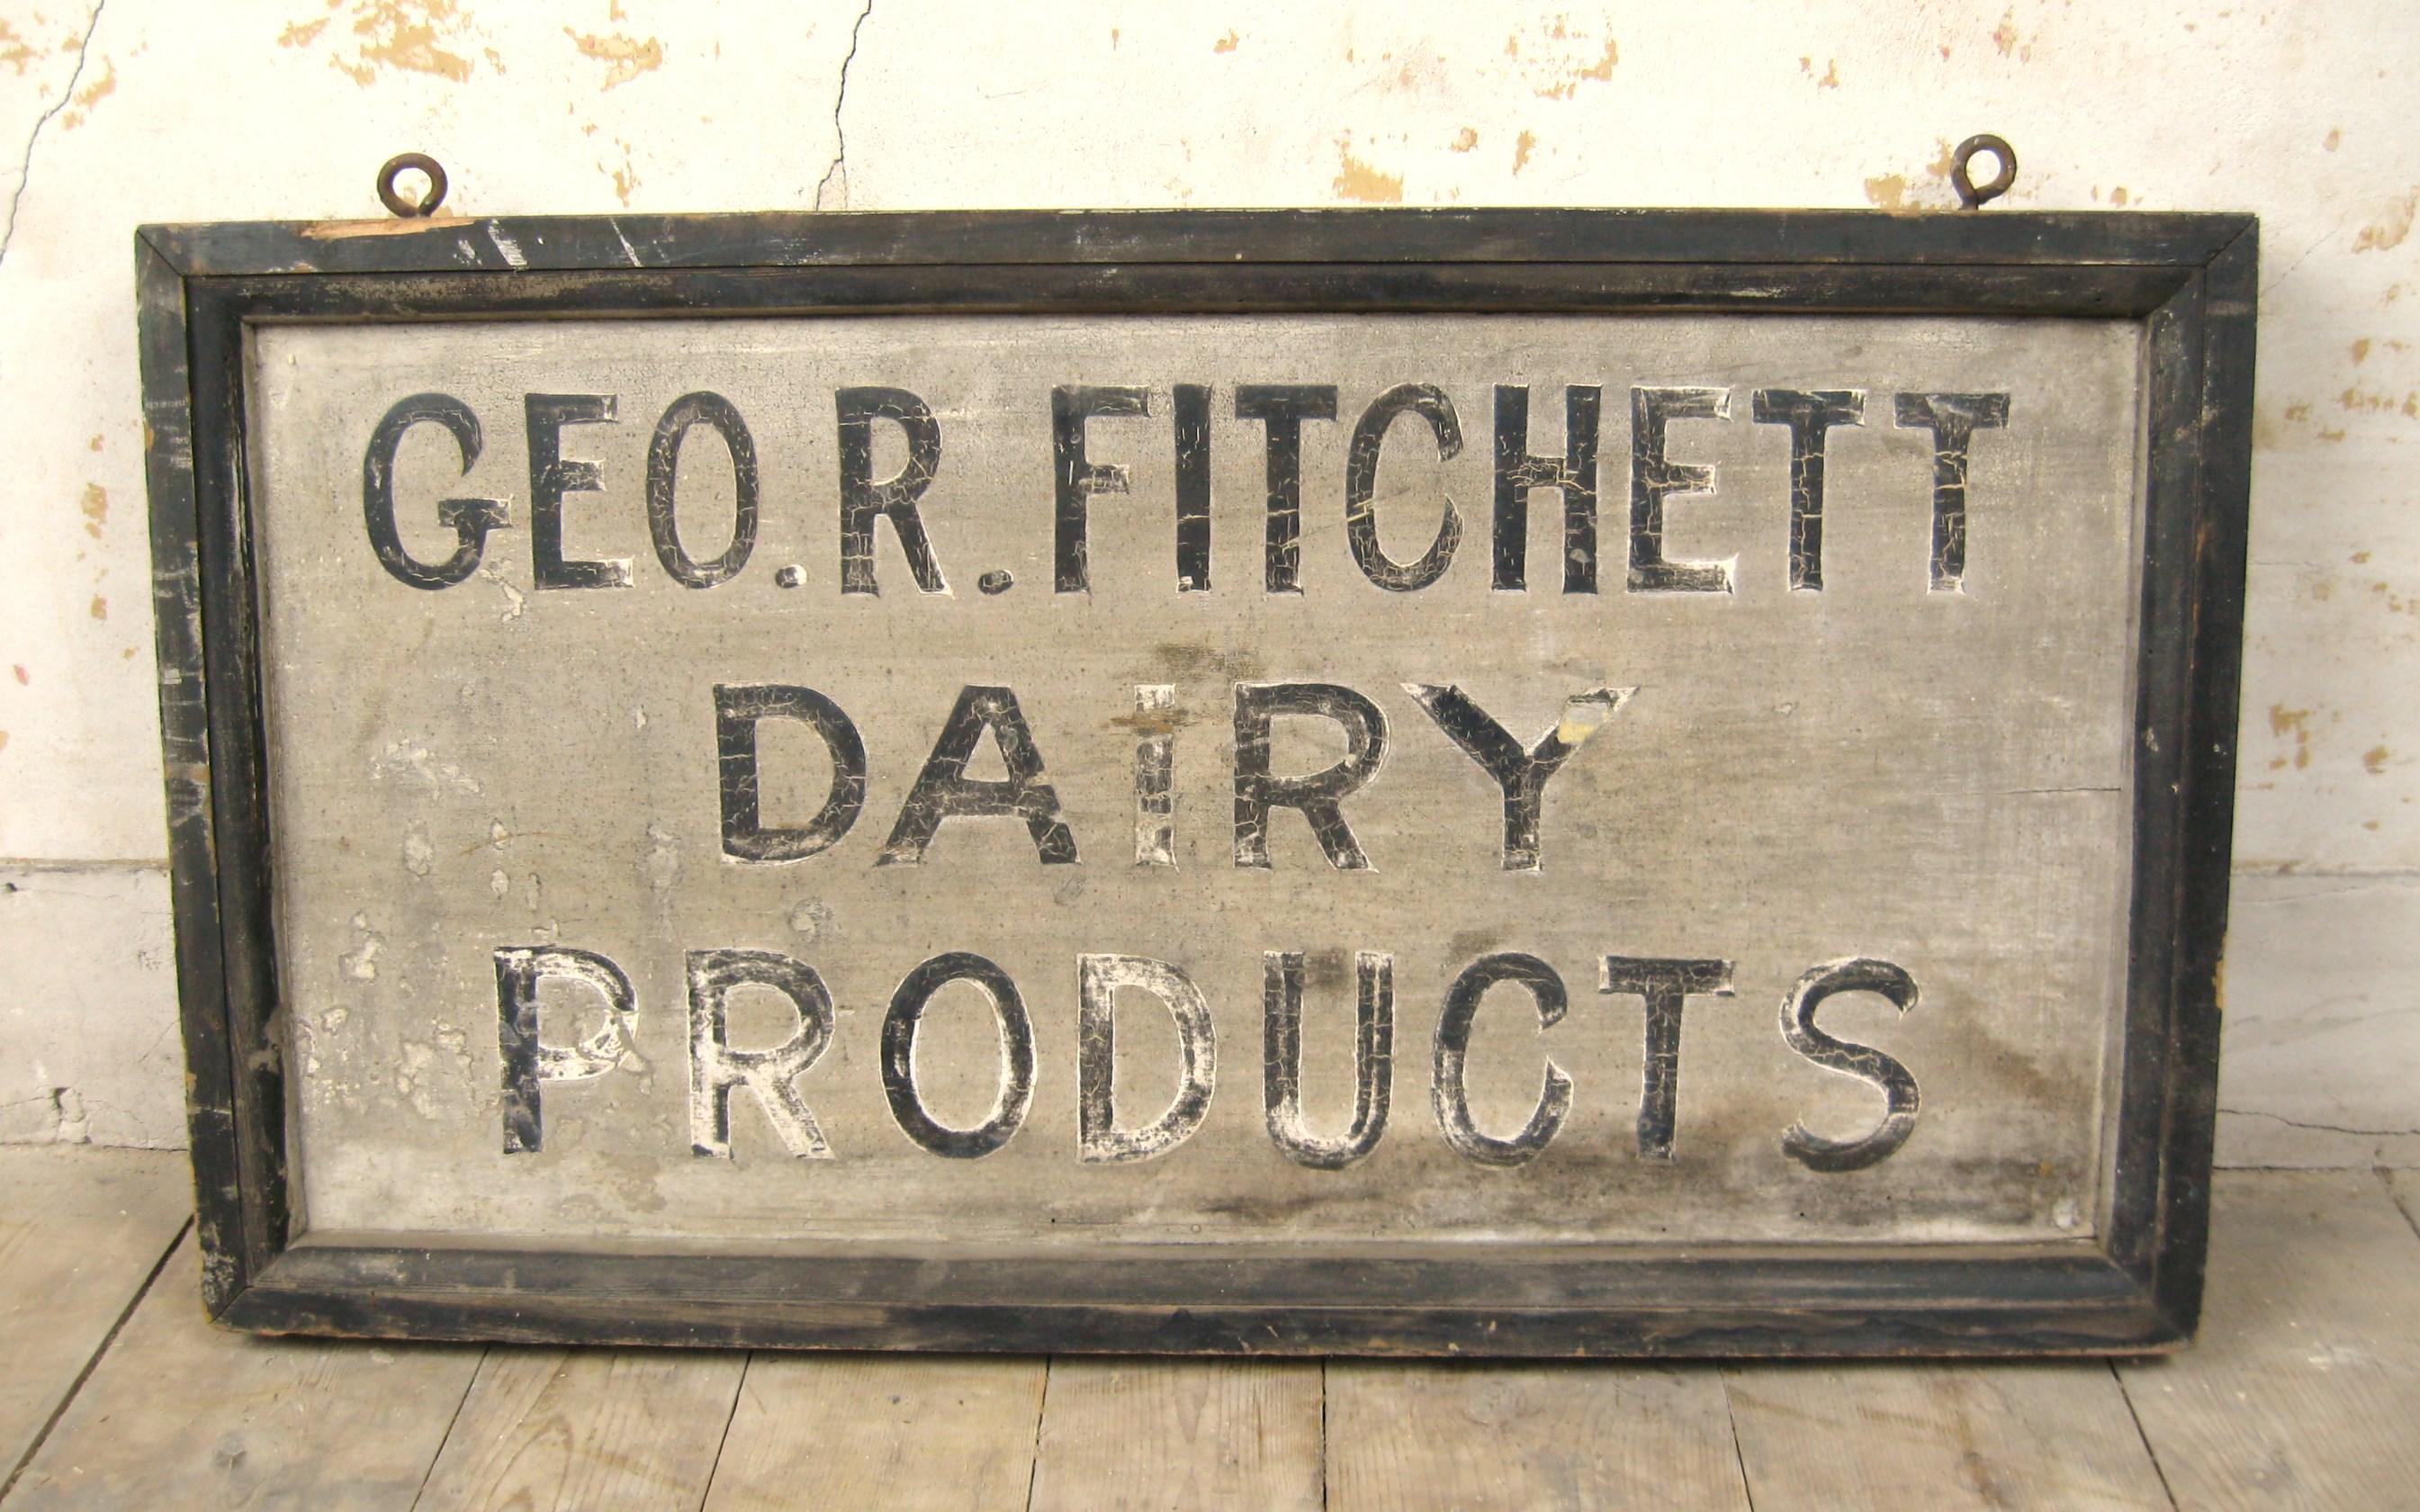 Wonderful 1940s Geo Fitchett Dairy Products Trade sign, this wooden trade sign is in wonderful original condition. It has hooks on the top for hanging, it is double sided as you can see in the photos. Please look at the photos, it hasn’t been